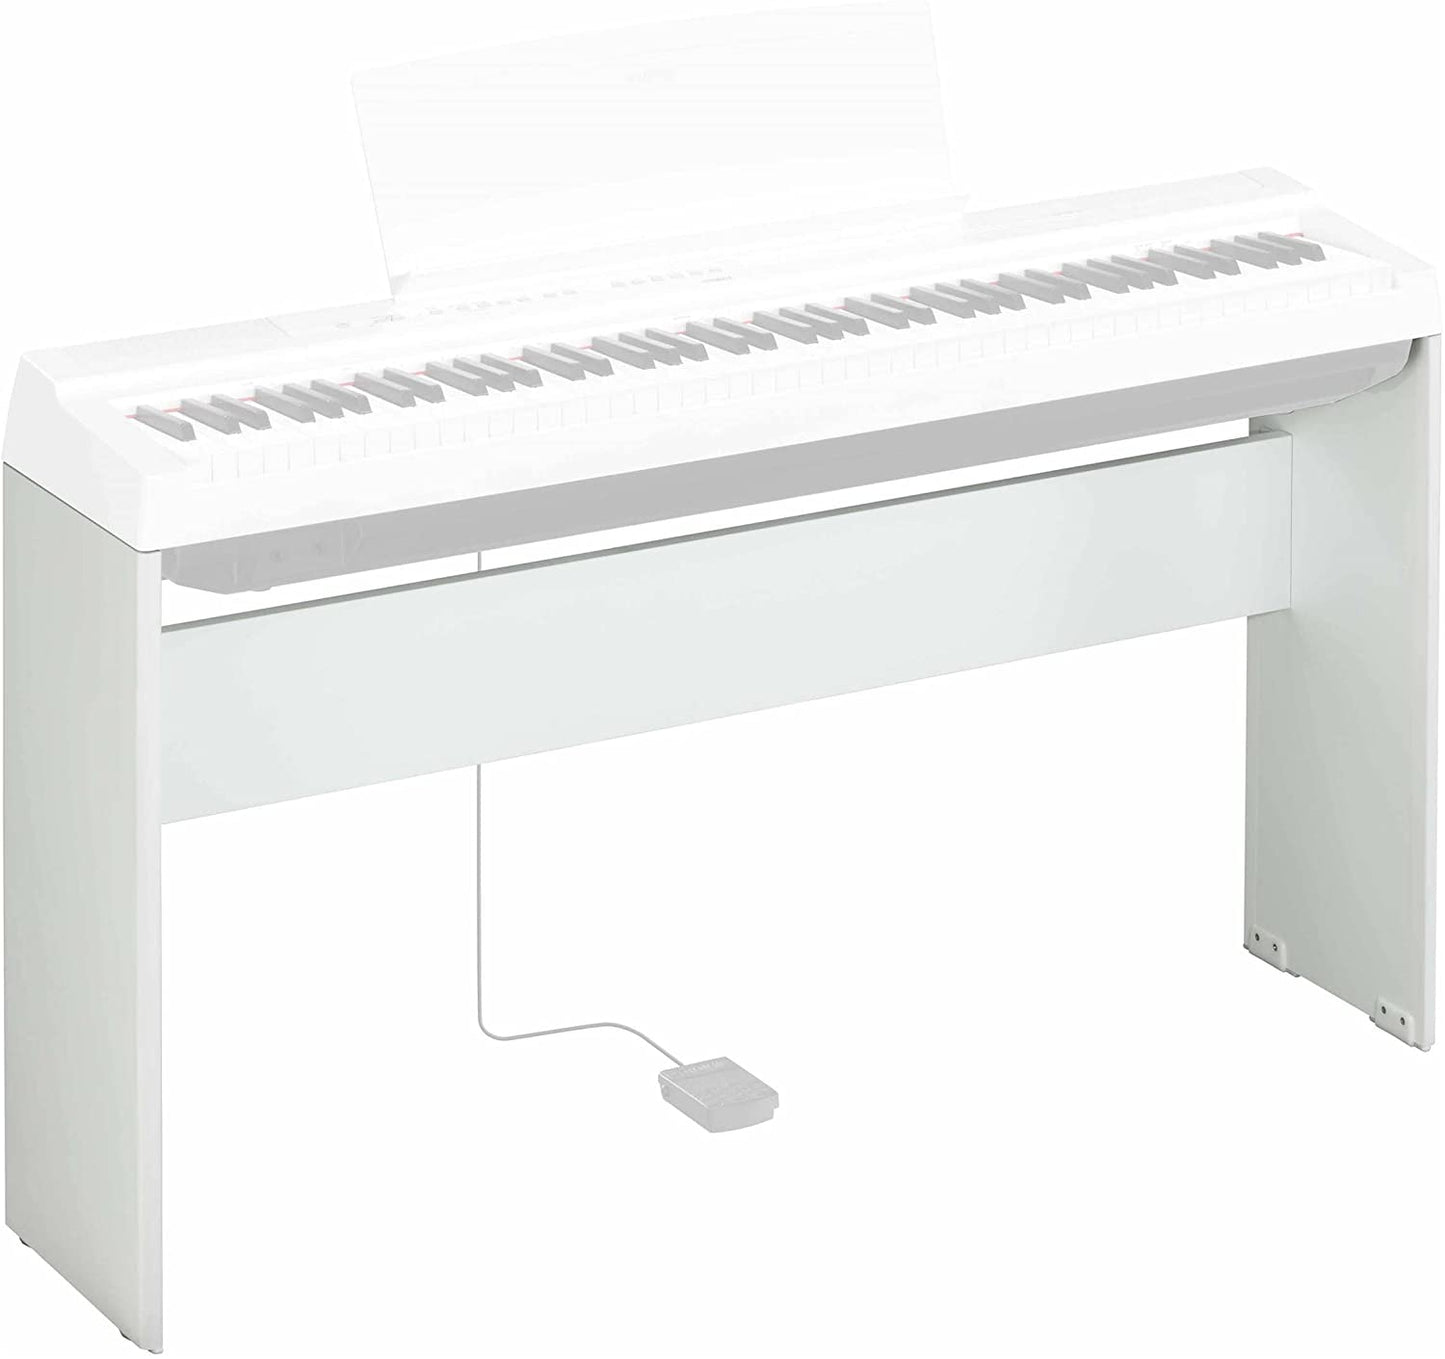 Yamaha L125 Stand For P125 Piano